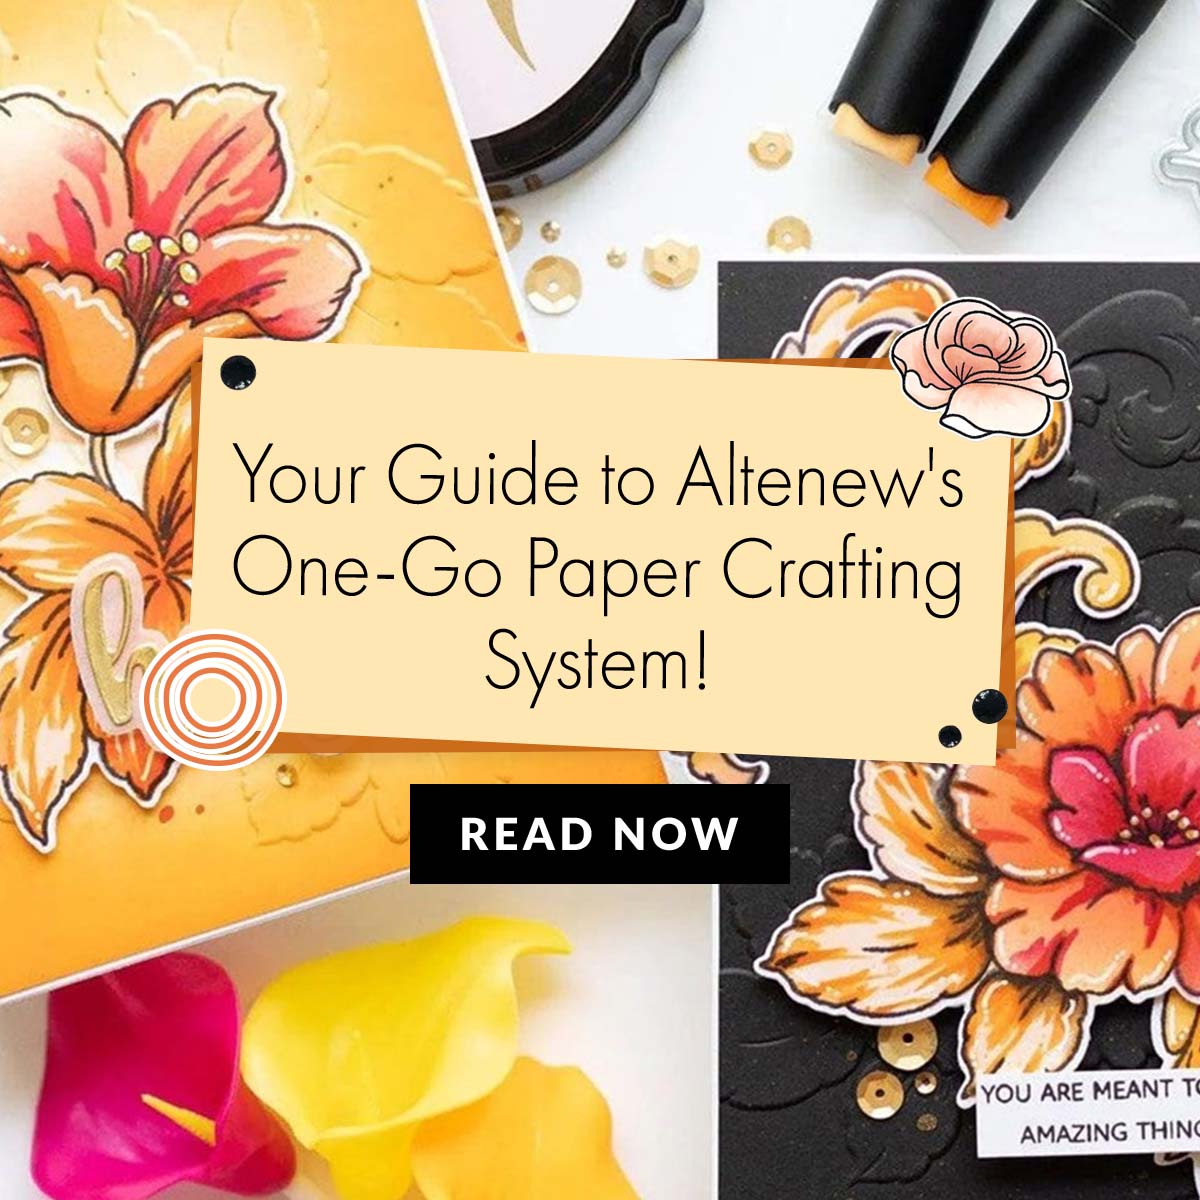 One-Go Crafting 101: Your Guide to Efficient Paper Crafting!